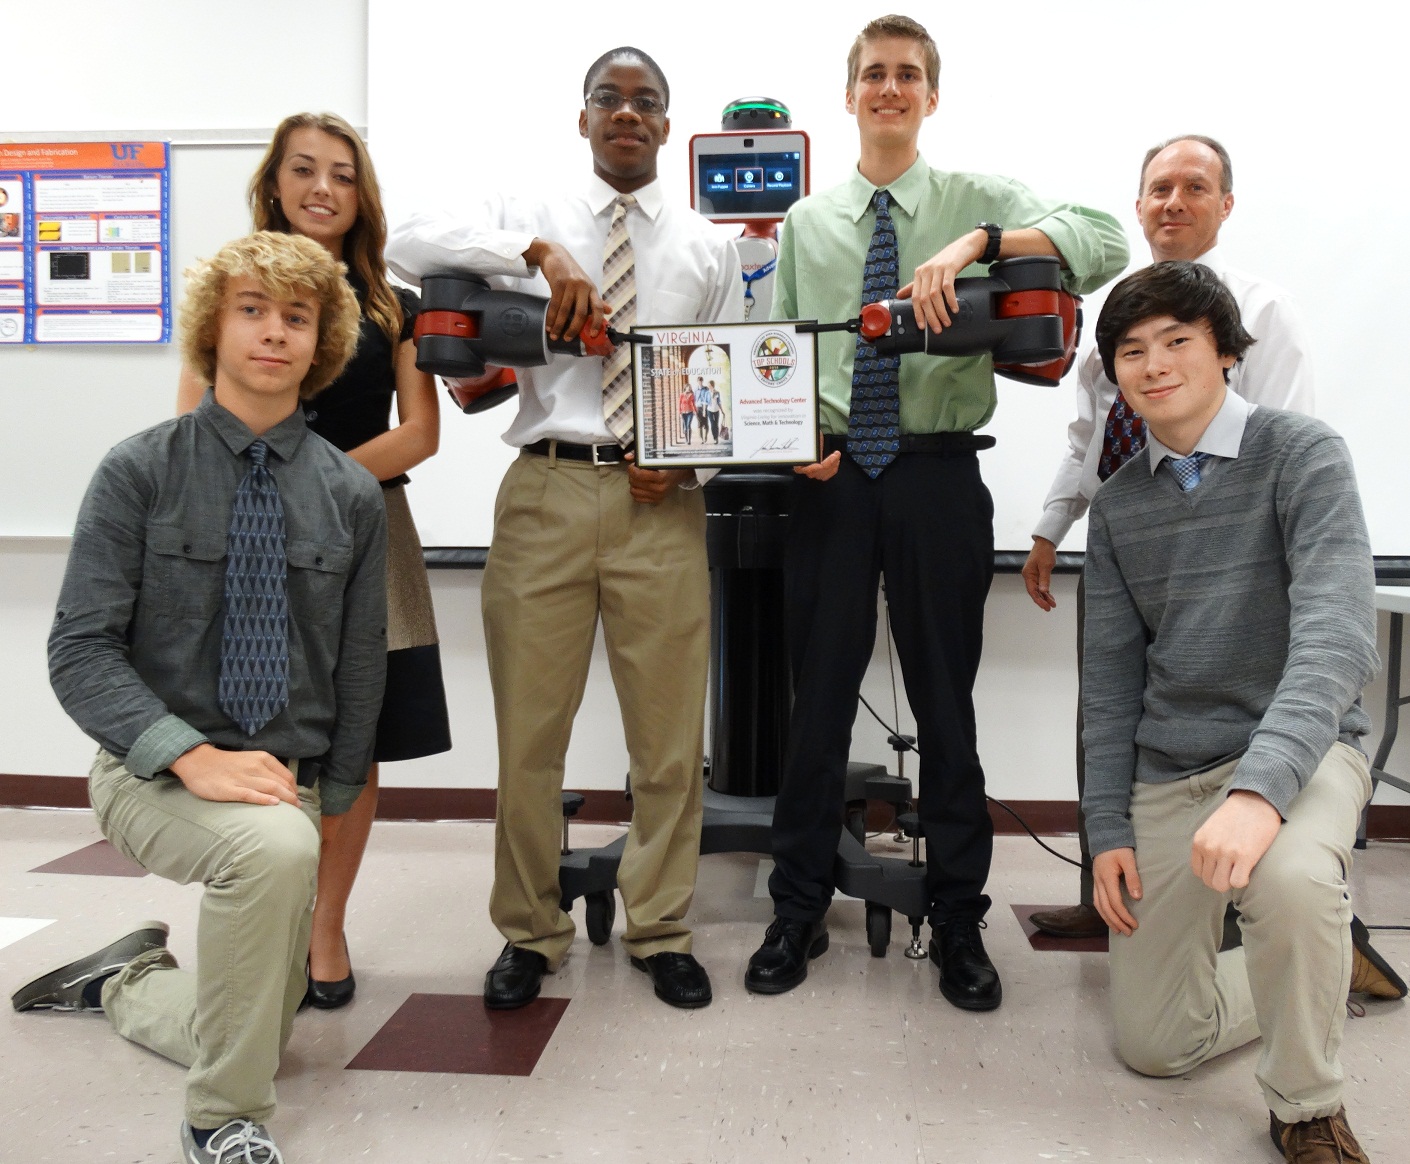 Pictured are students from the Engineering Technology Coding Club with Mr. Michael D Taylor, Director (far right, back row): First row: Keith Marshall, Michael Cole; second row: Sage Barbrow, Khambrel Rembert, and Duncan Clark. 